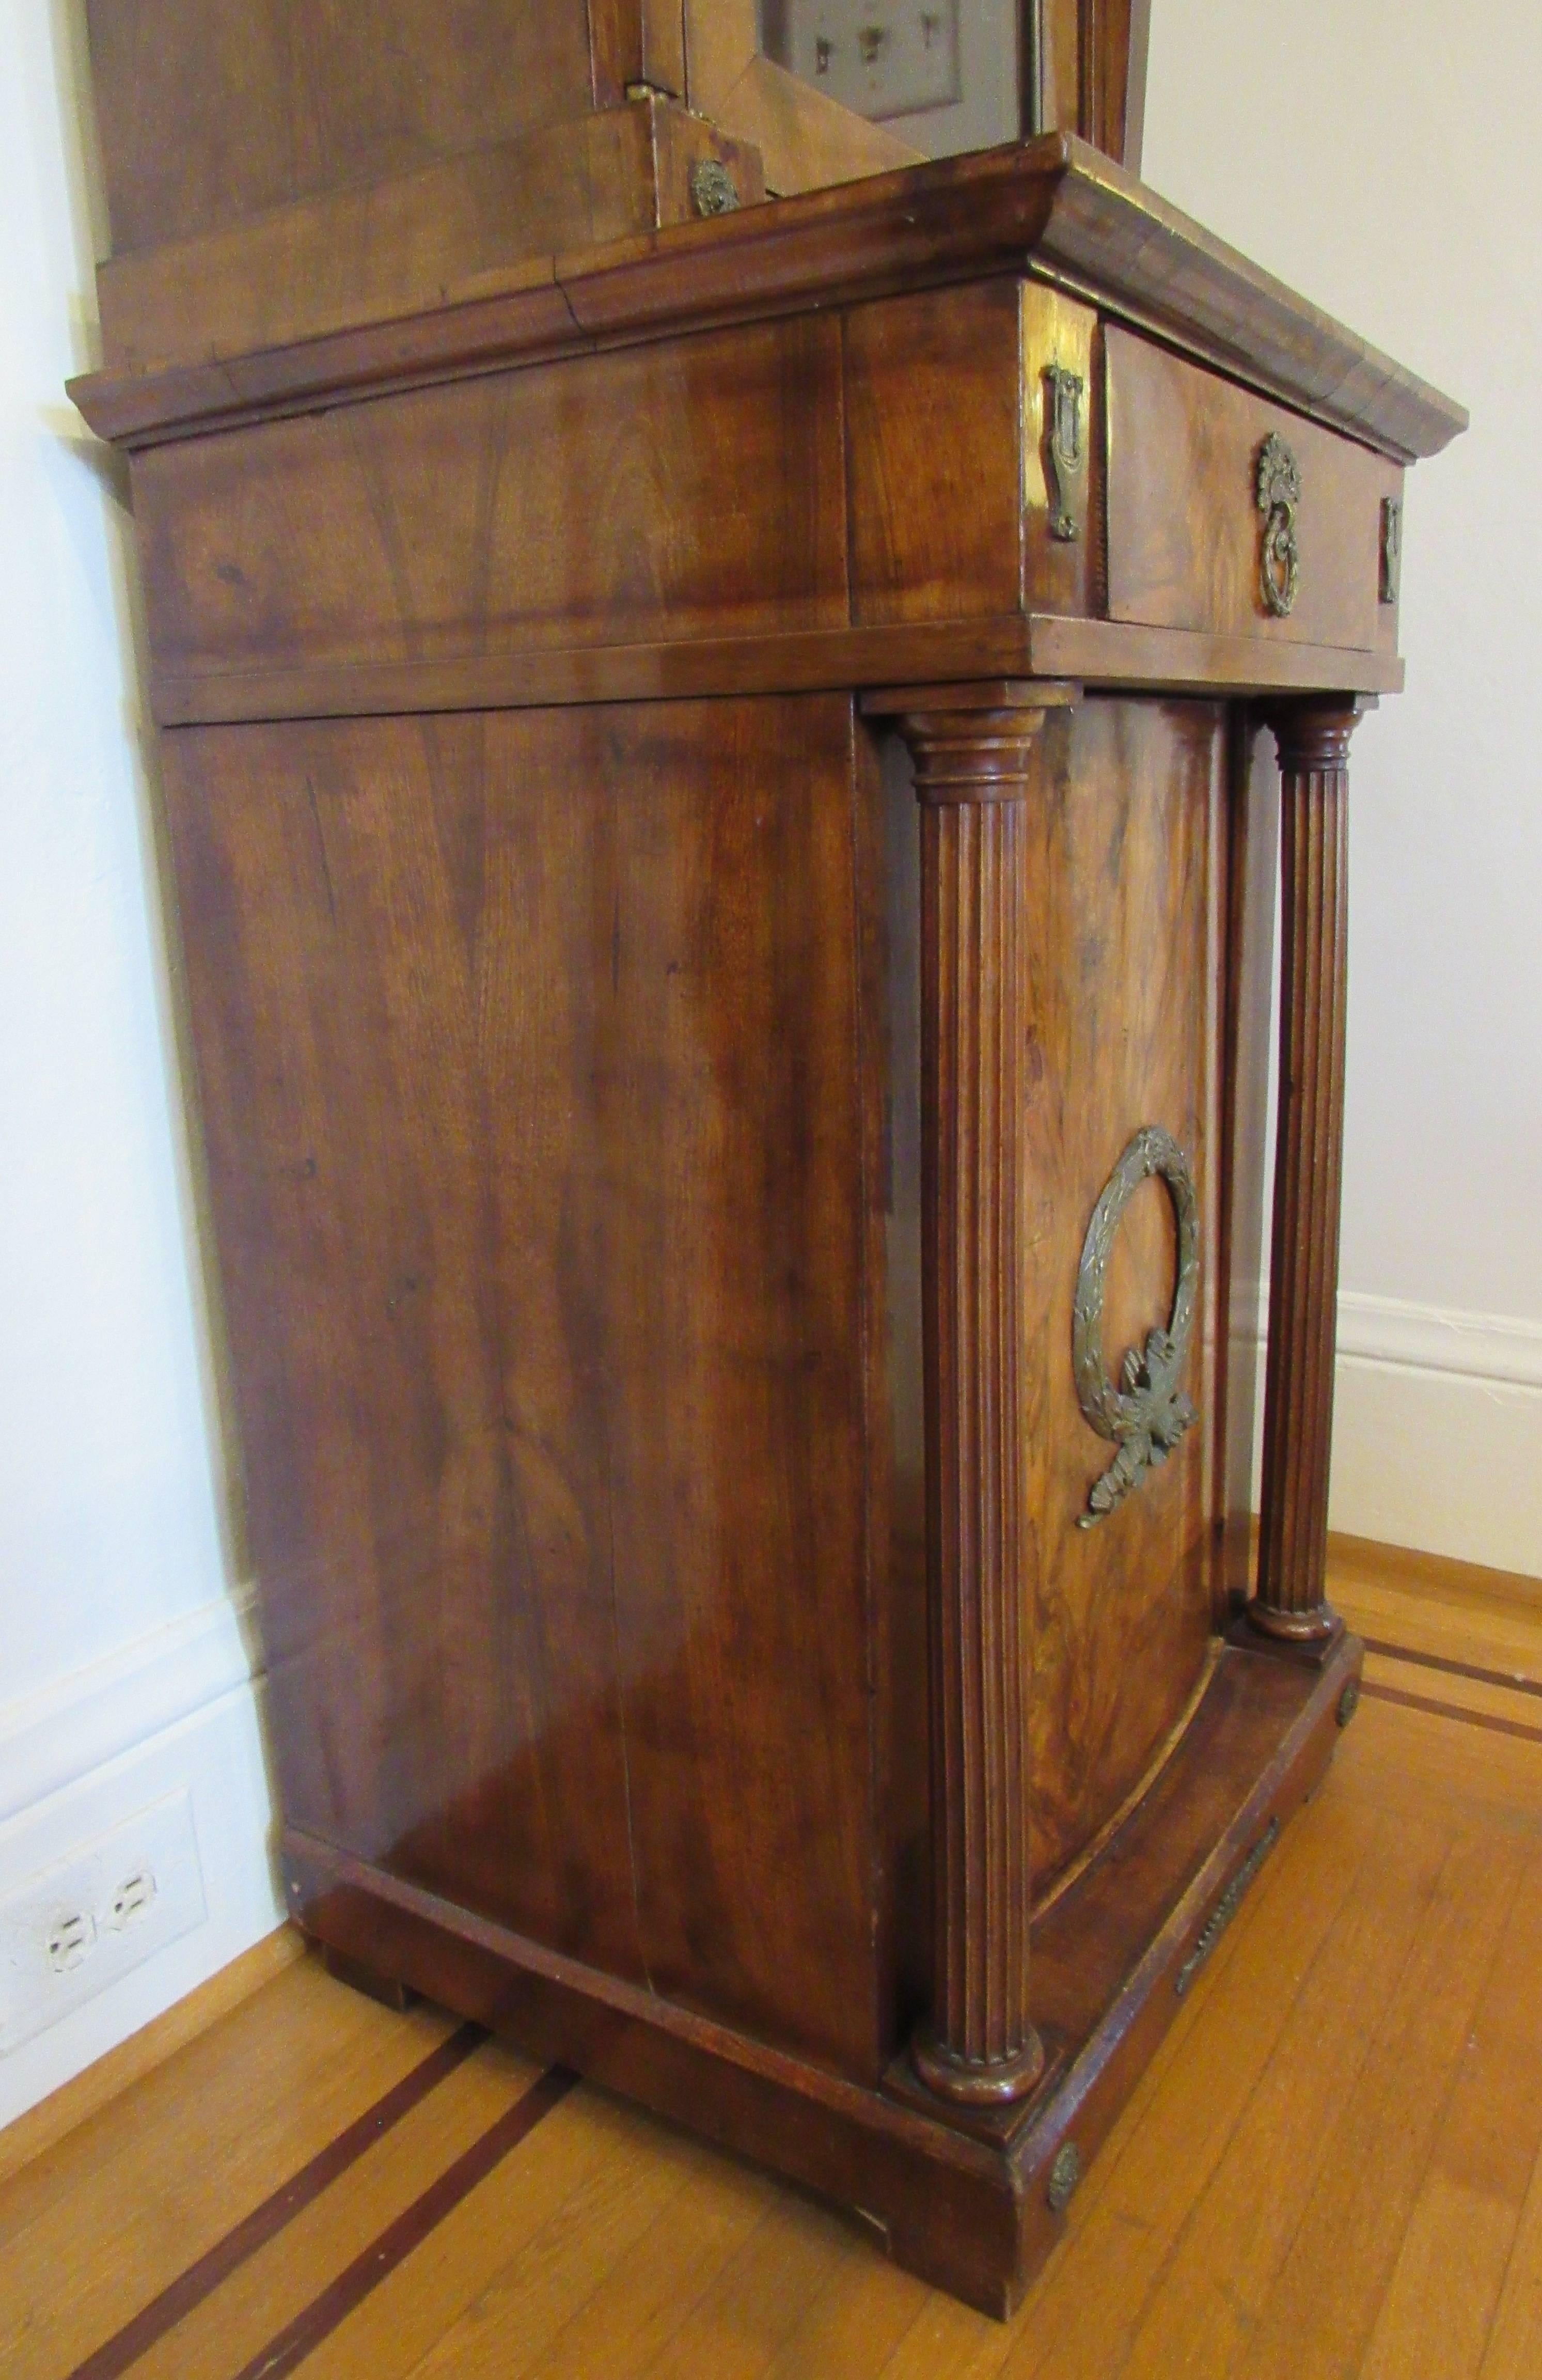 Empire Revival French Empire Cabinet 19th Century, Mahogany with Ormolu Mounts For Sale